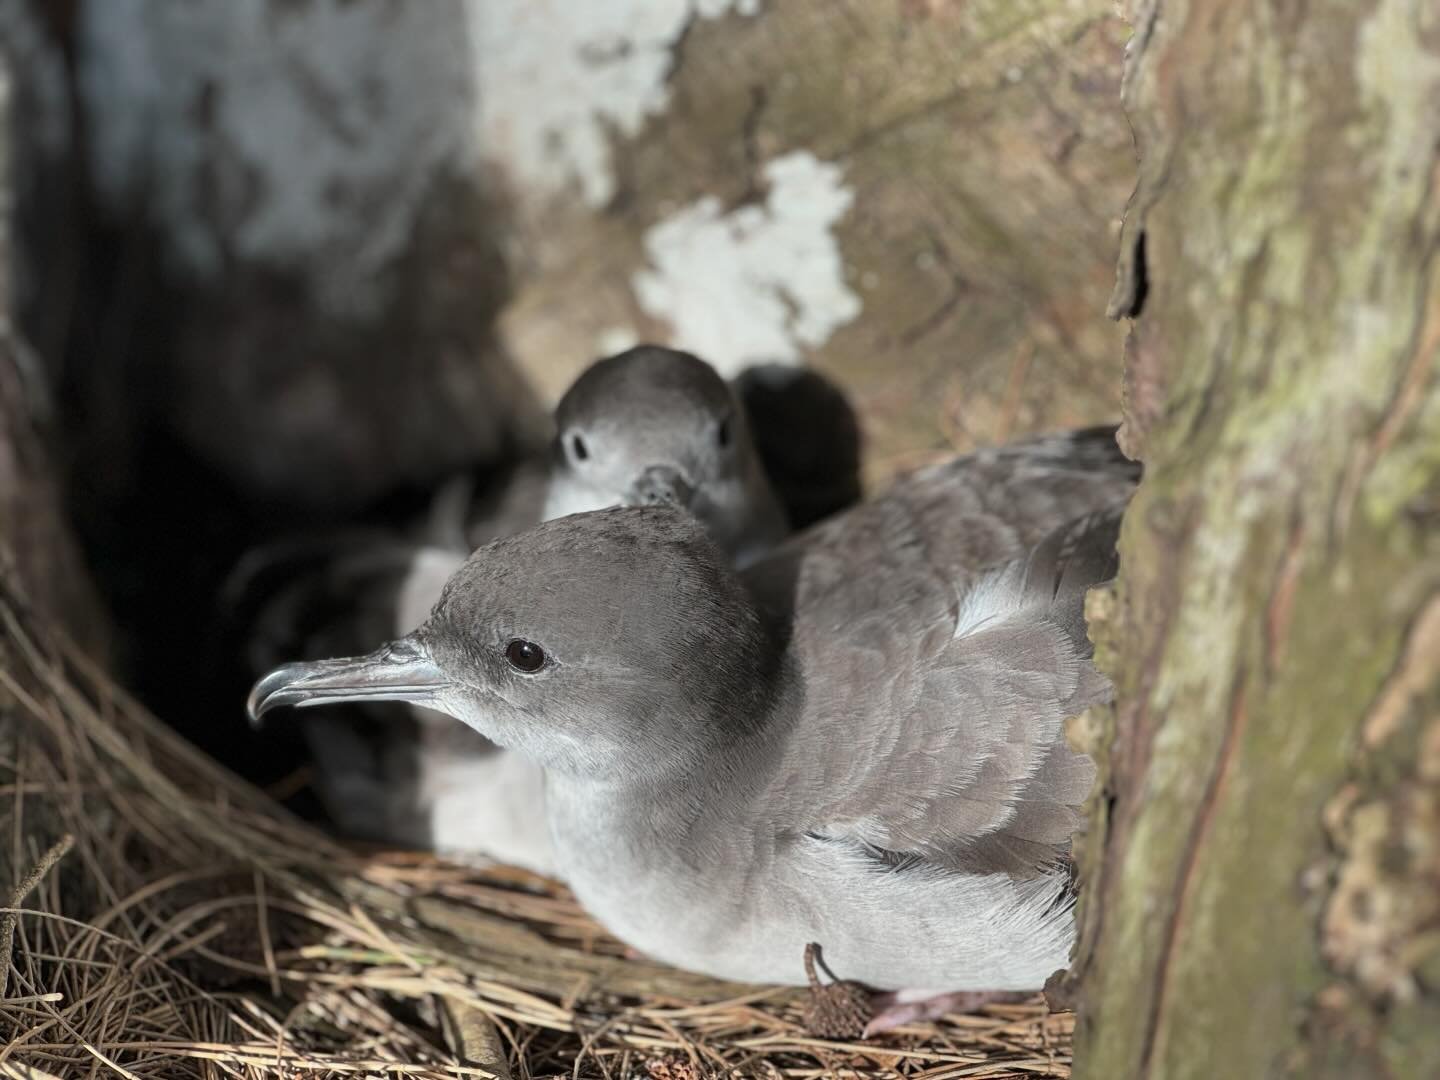 Each year around mid-March ʻuaʻu kani, or wedge-tailed shearwaters, return to Kīlauea Point NWR and other coastal areas around the Island of Kauaʻi. They fly here from waters near the Gulf of Panama to nest in burrows and under rocks or vegetation as